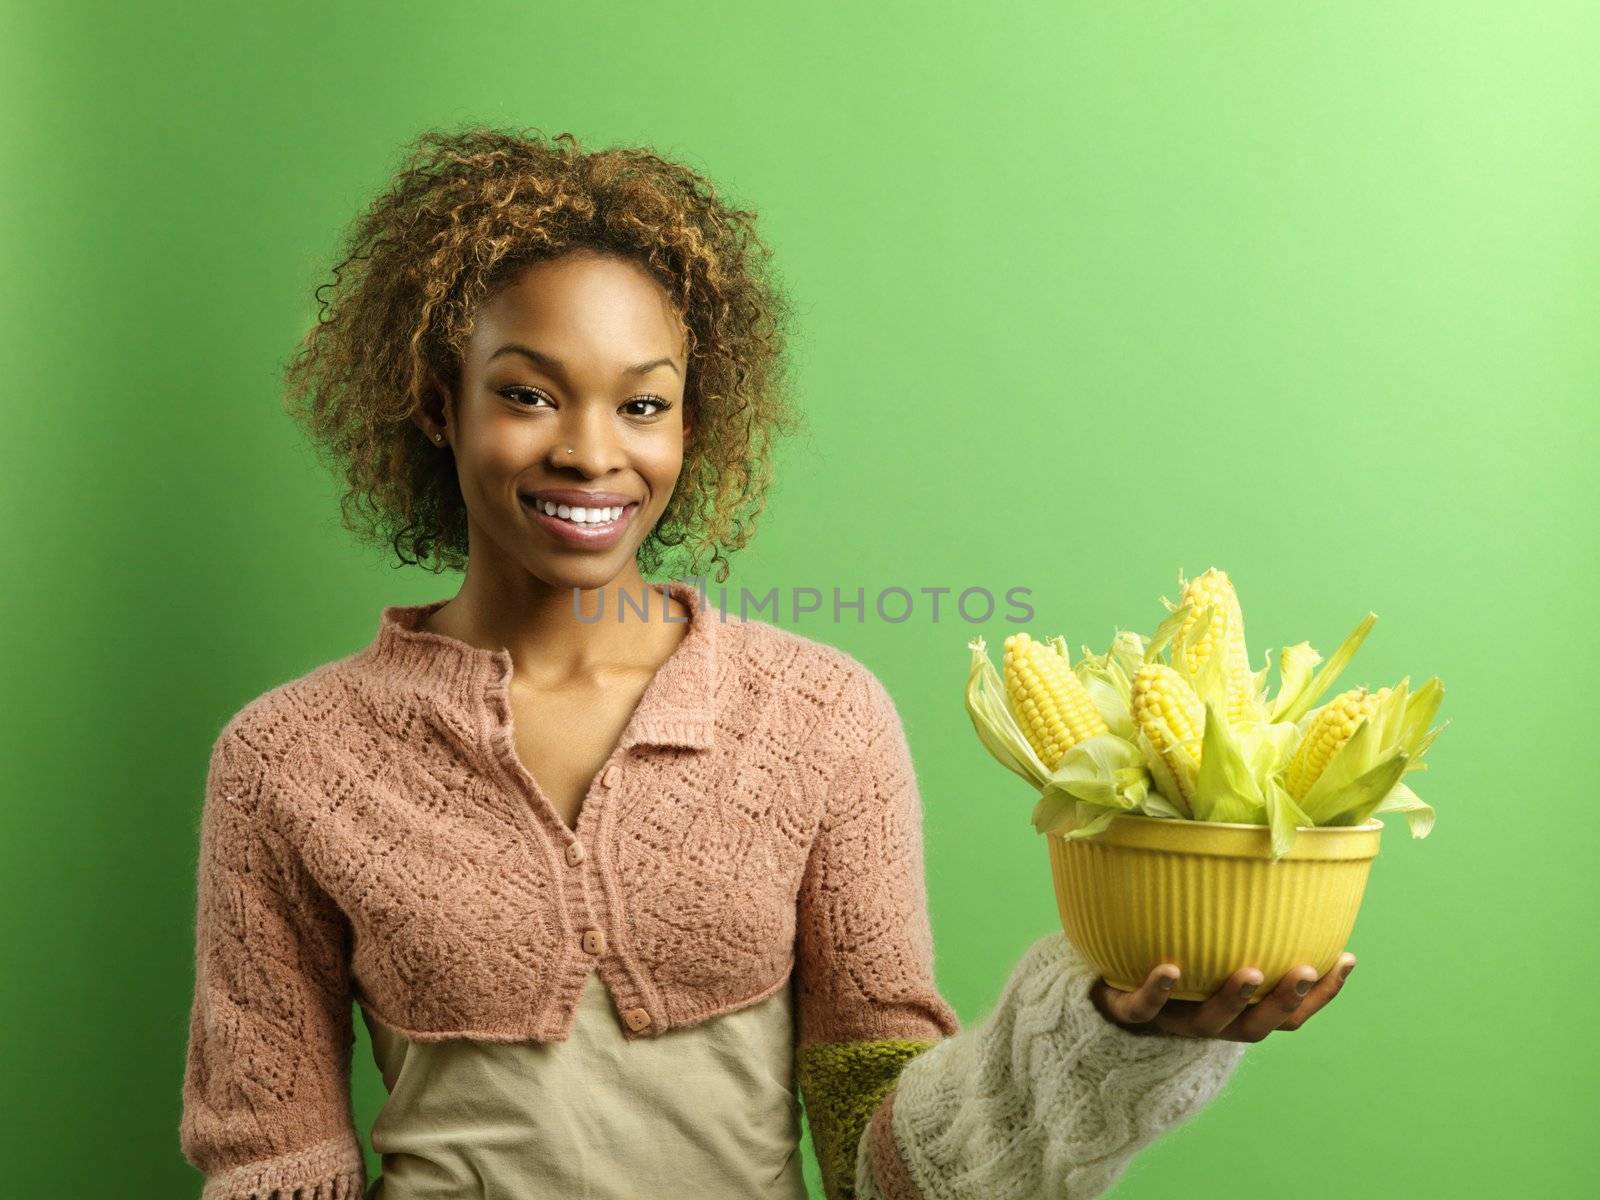 Portrait of pretty young woman standing against green background holding bowl full of ears of corn.